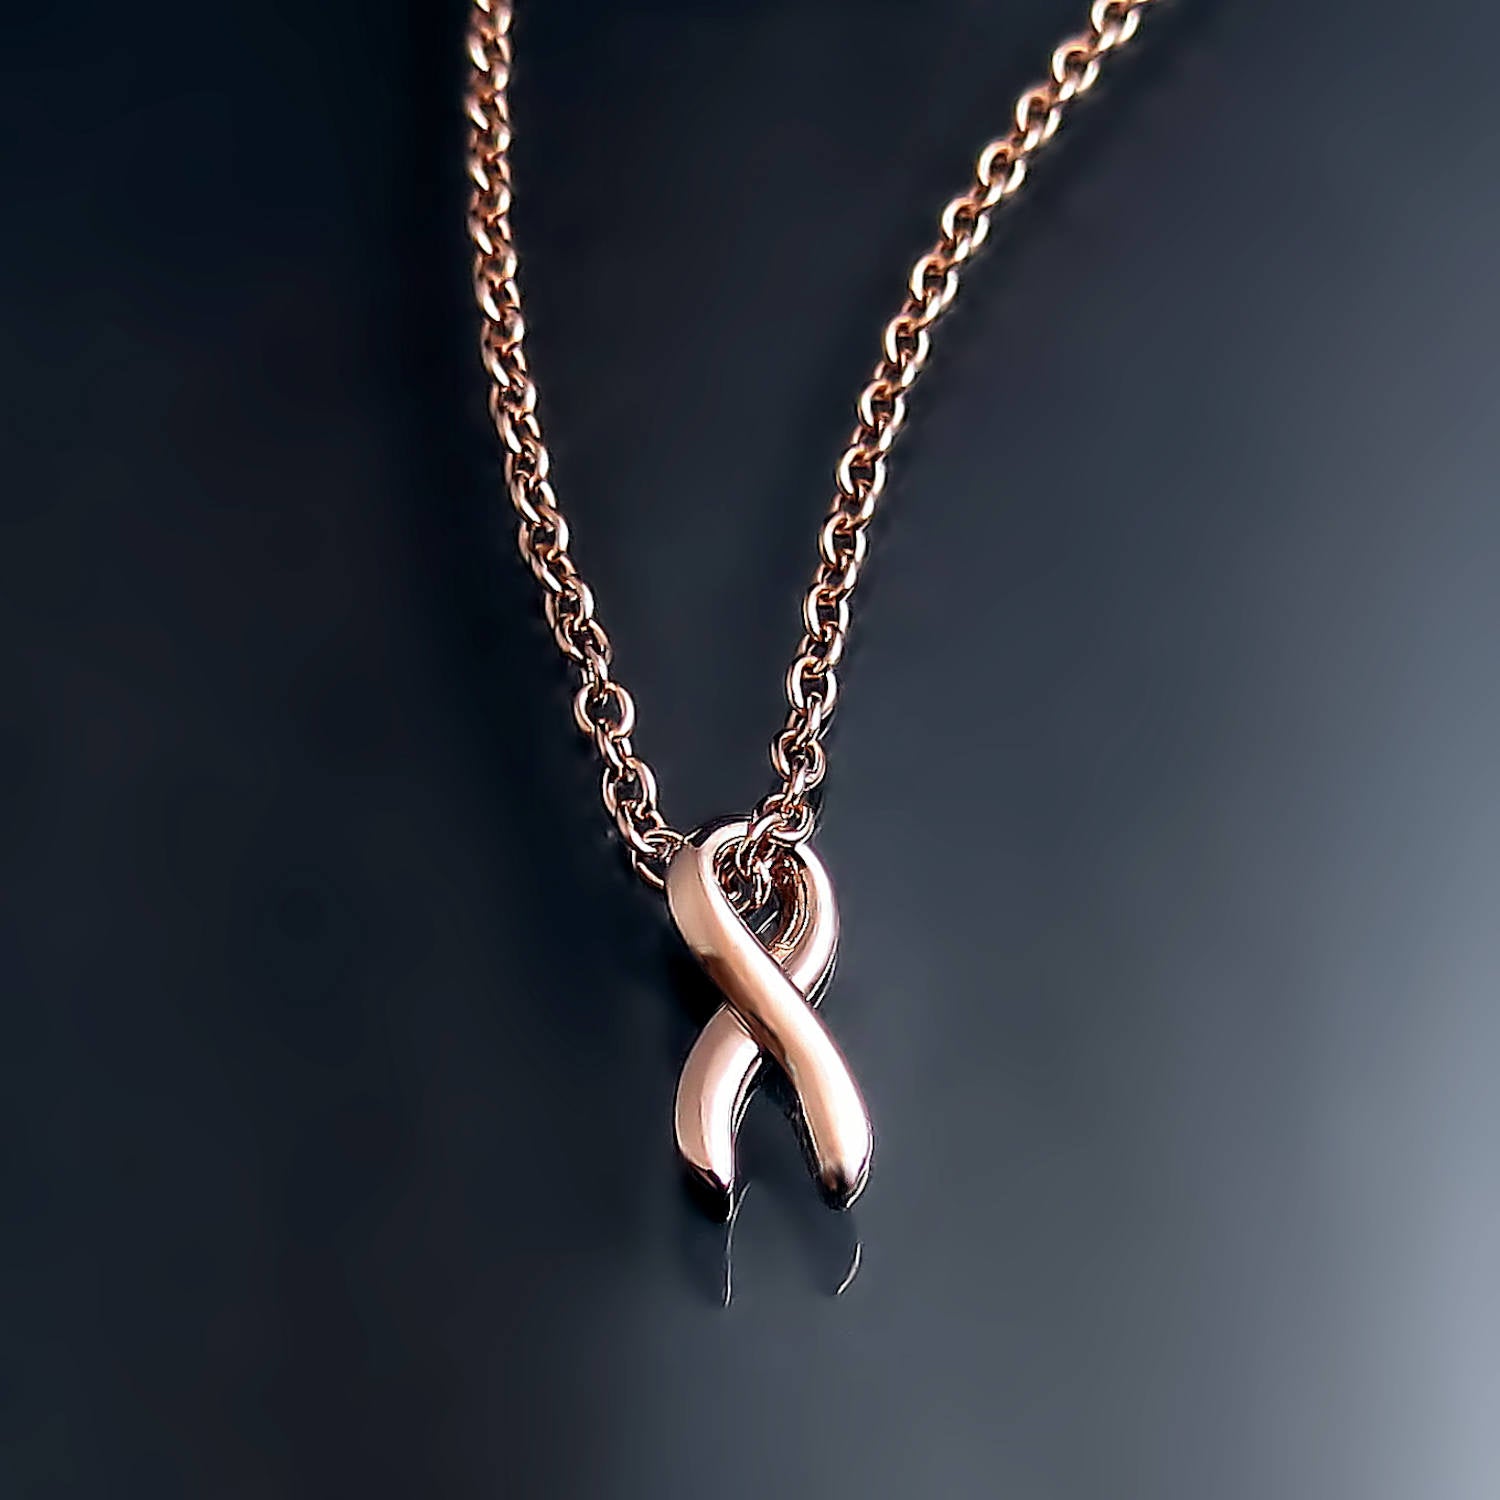 The Golden Ribbon Necklace